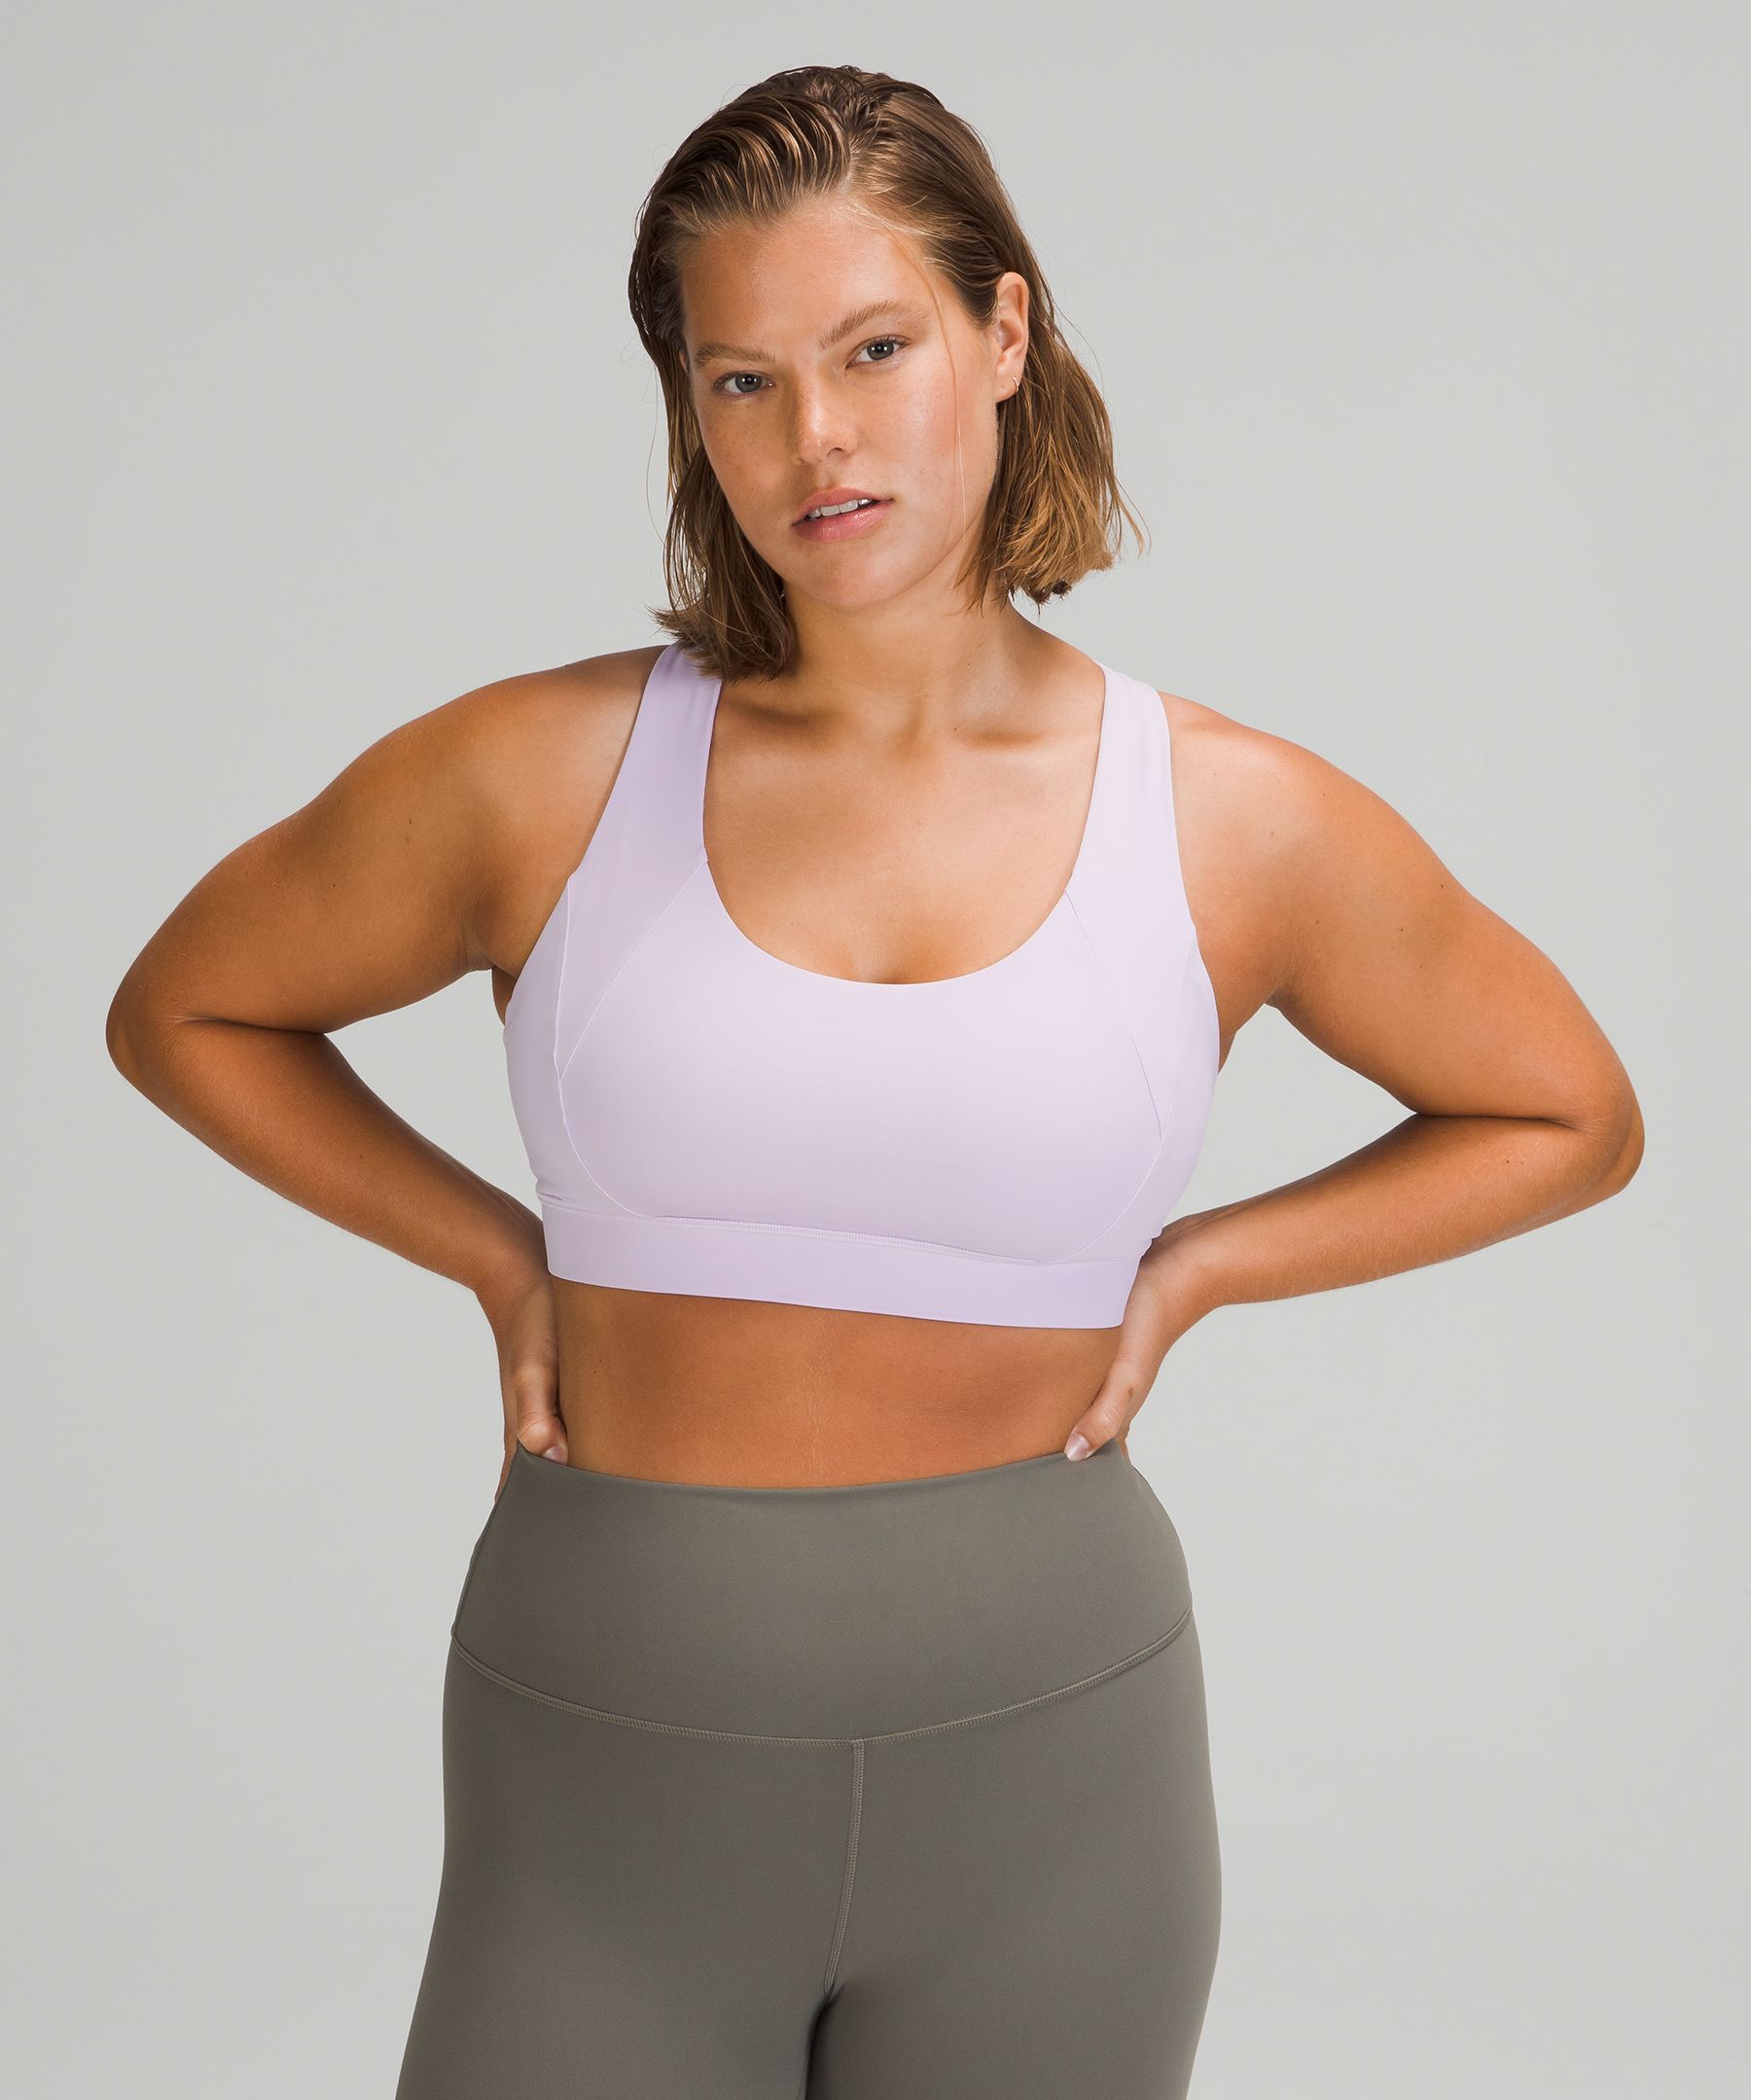 Lululemon Free To Be Elevated Bra Light Support, Dd/ddd(e) Cups In Lavender Dew